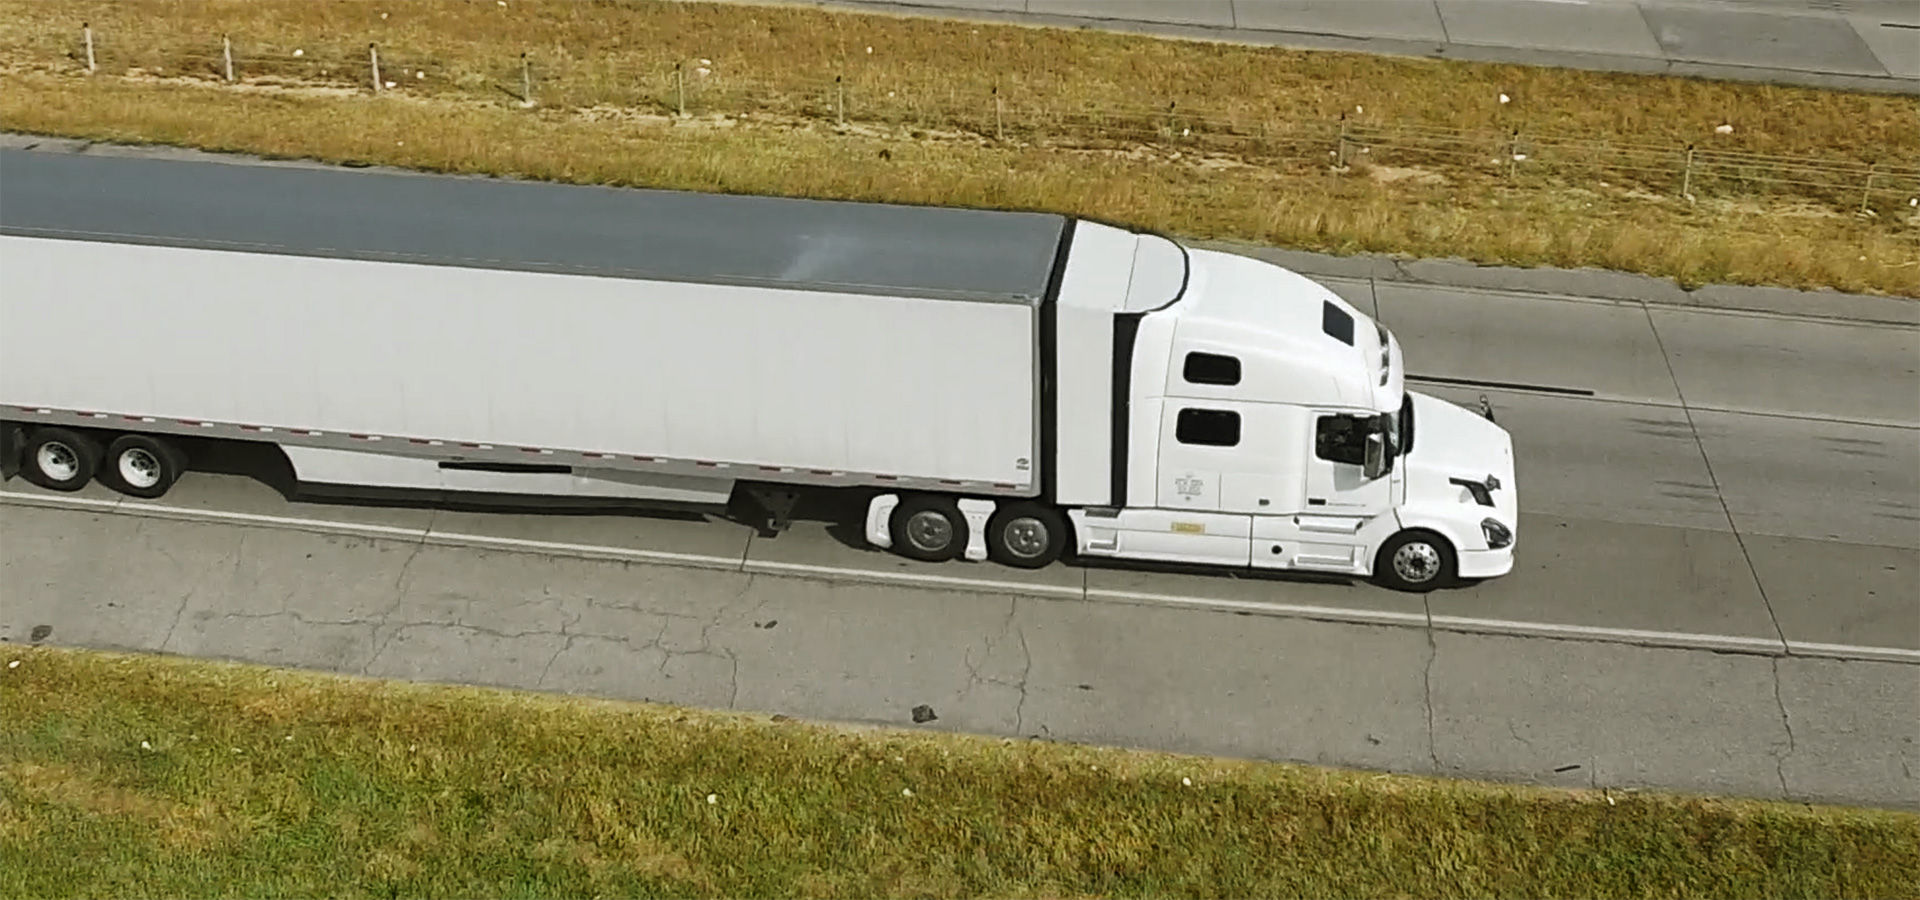 Semi Truck and trailer on Freeway with TruckWings deployed